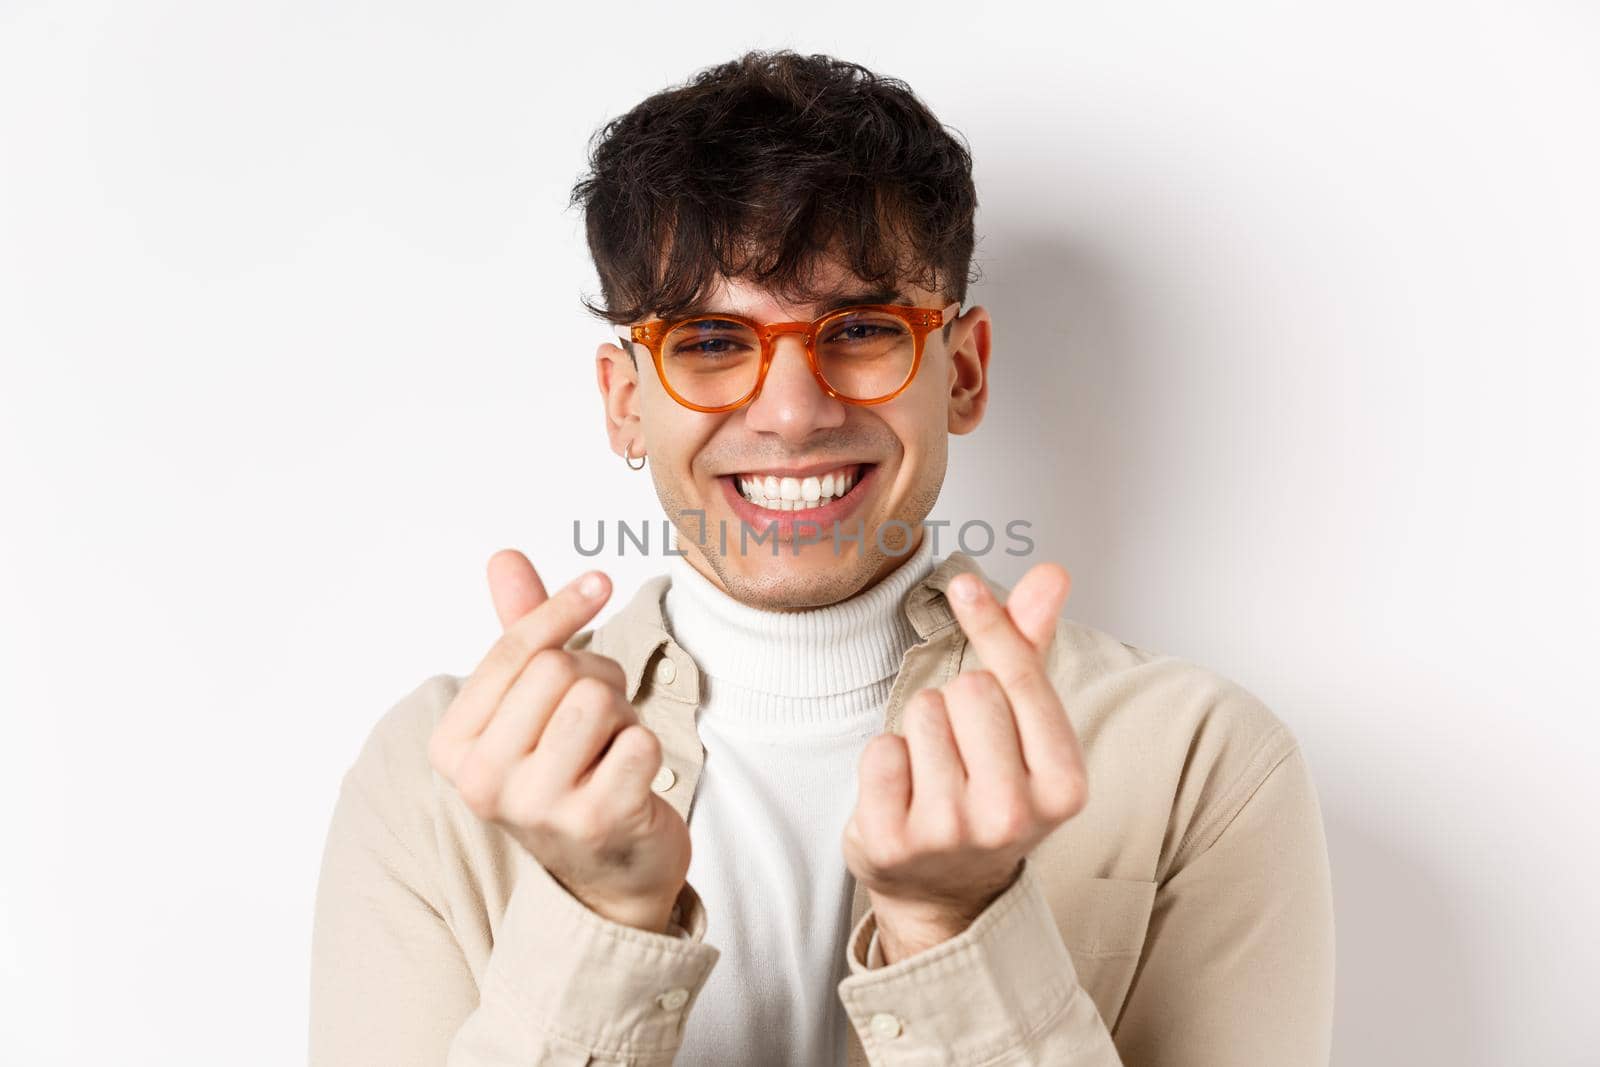 Cute young guy in glasses smiling and showing finger hearts, standing on white background.